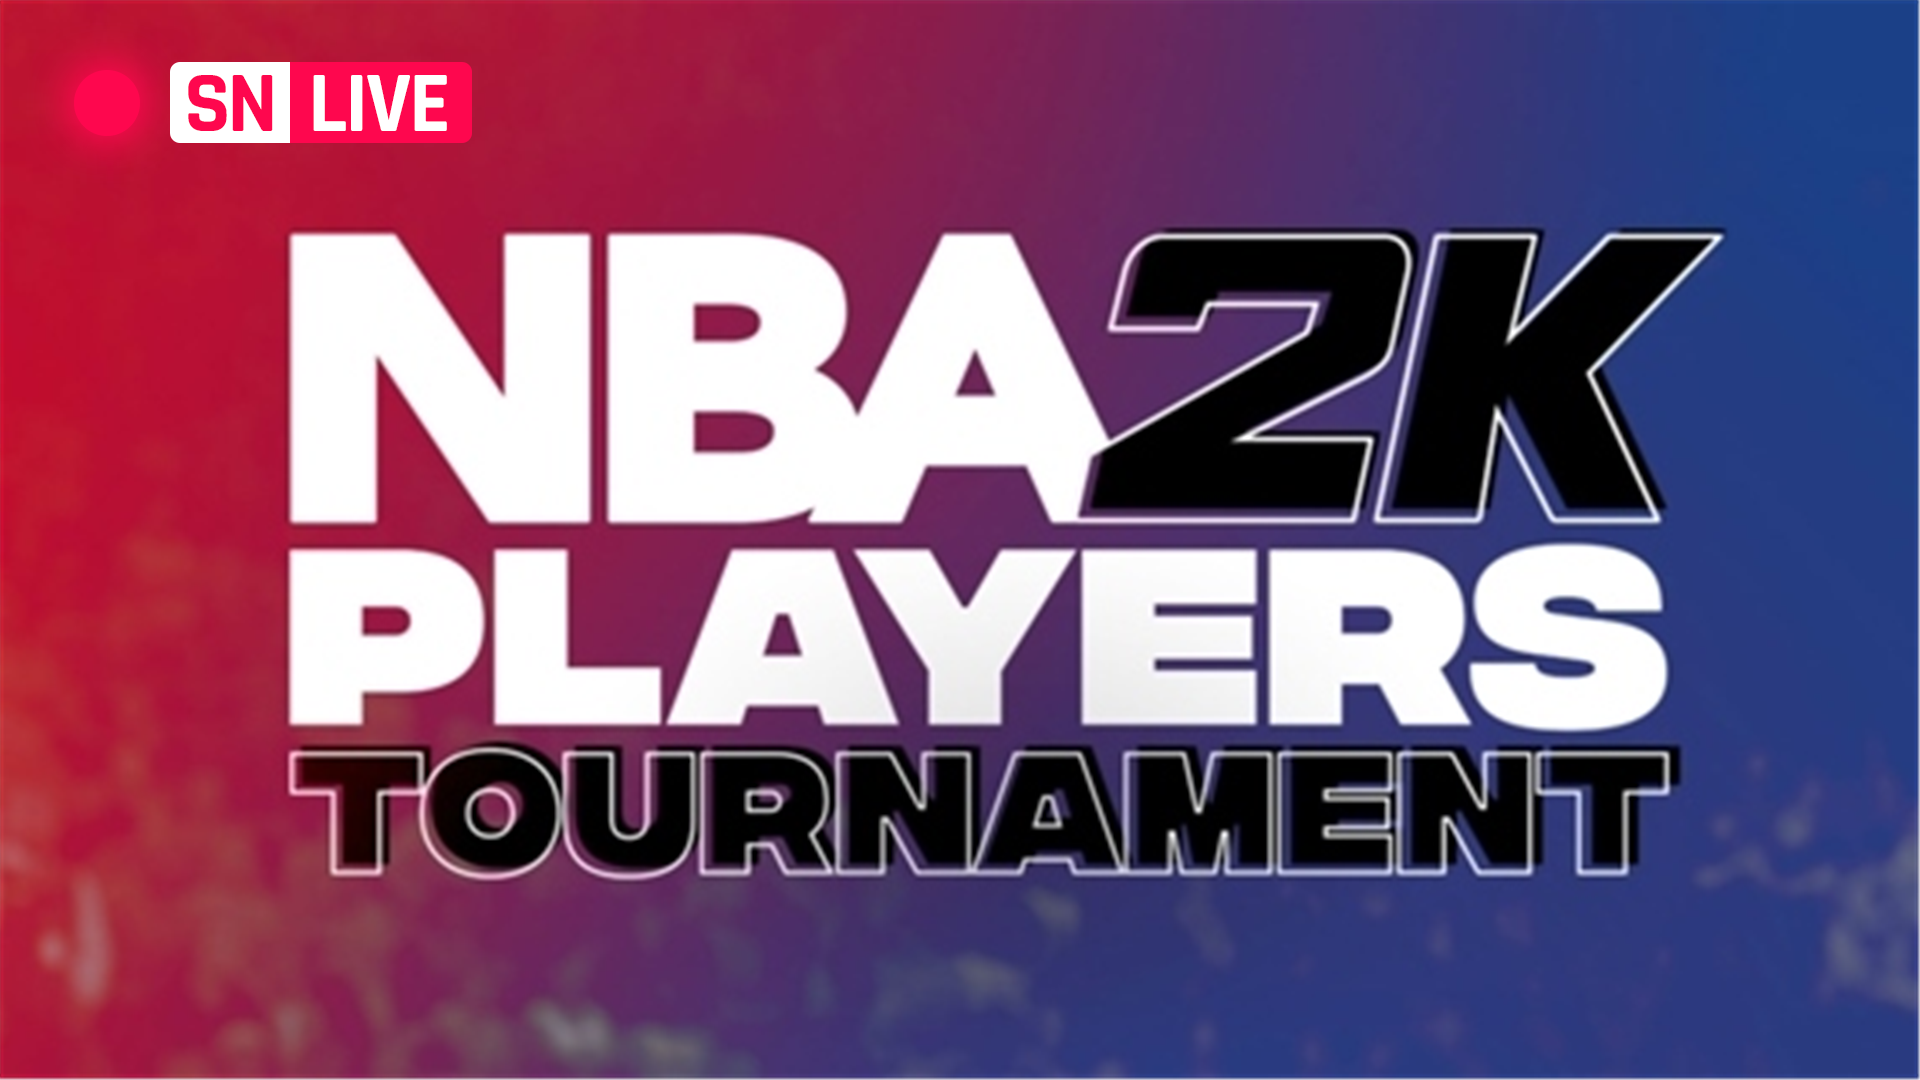 Nba 2k Tournament Bracket Results Scores From Espn S Players